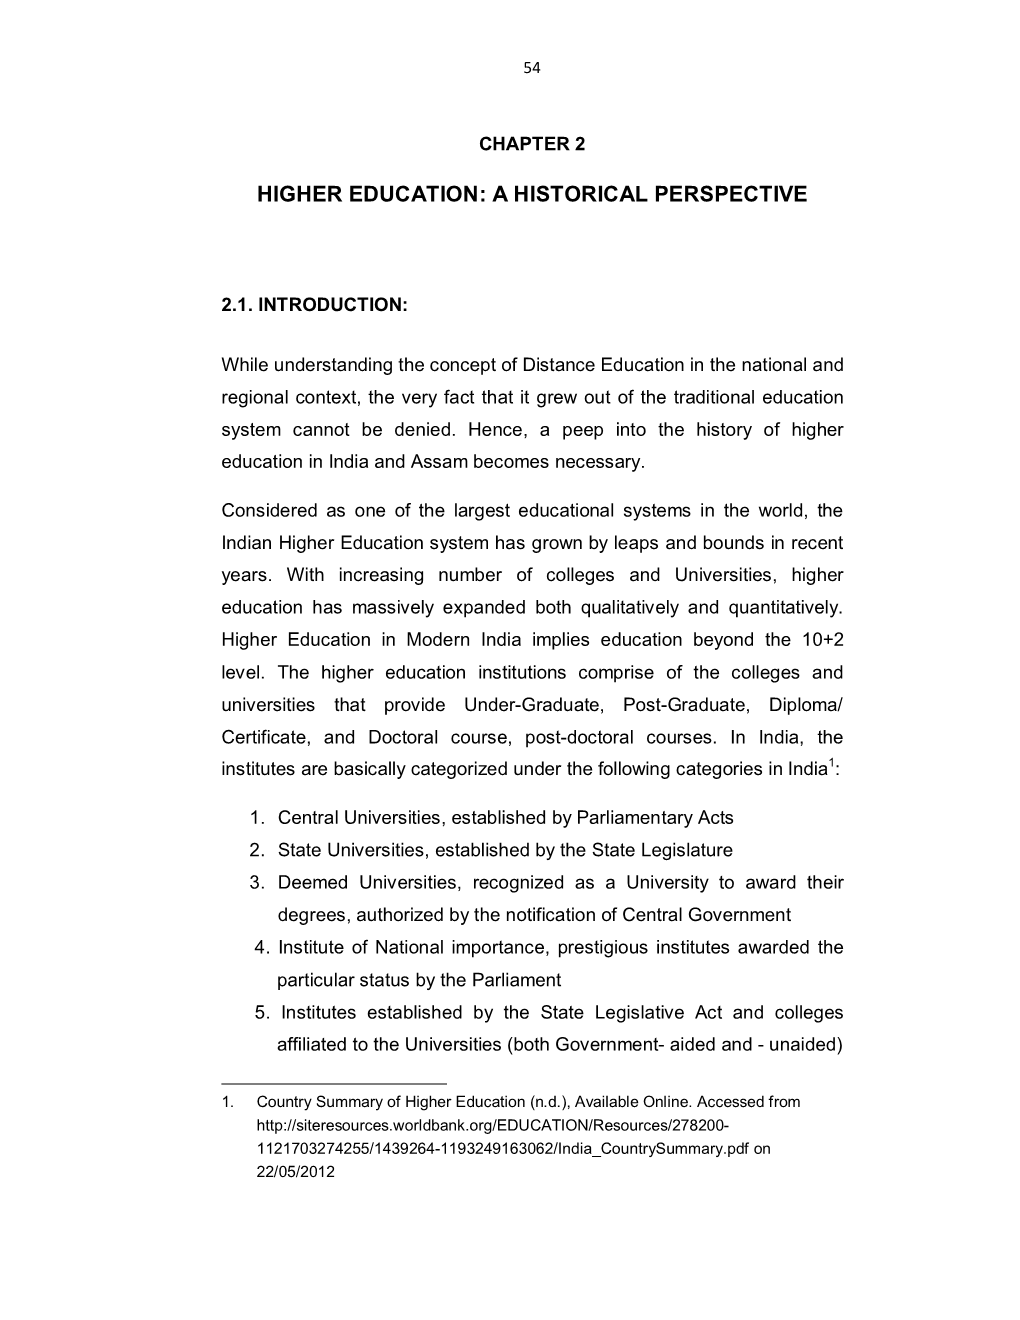 Higher Education: a Historical Perspective